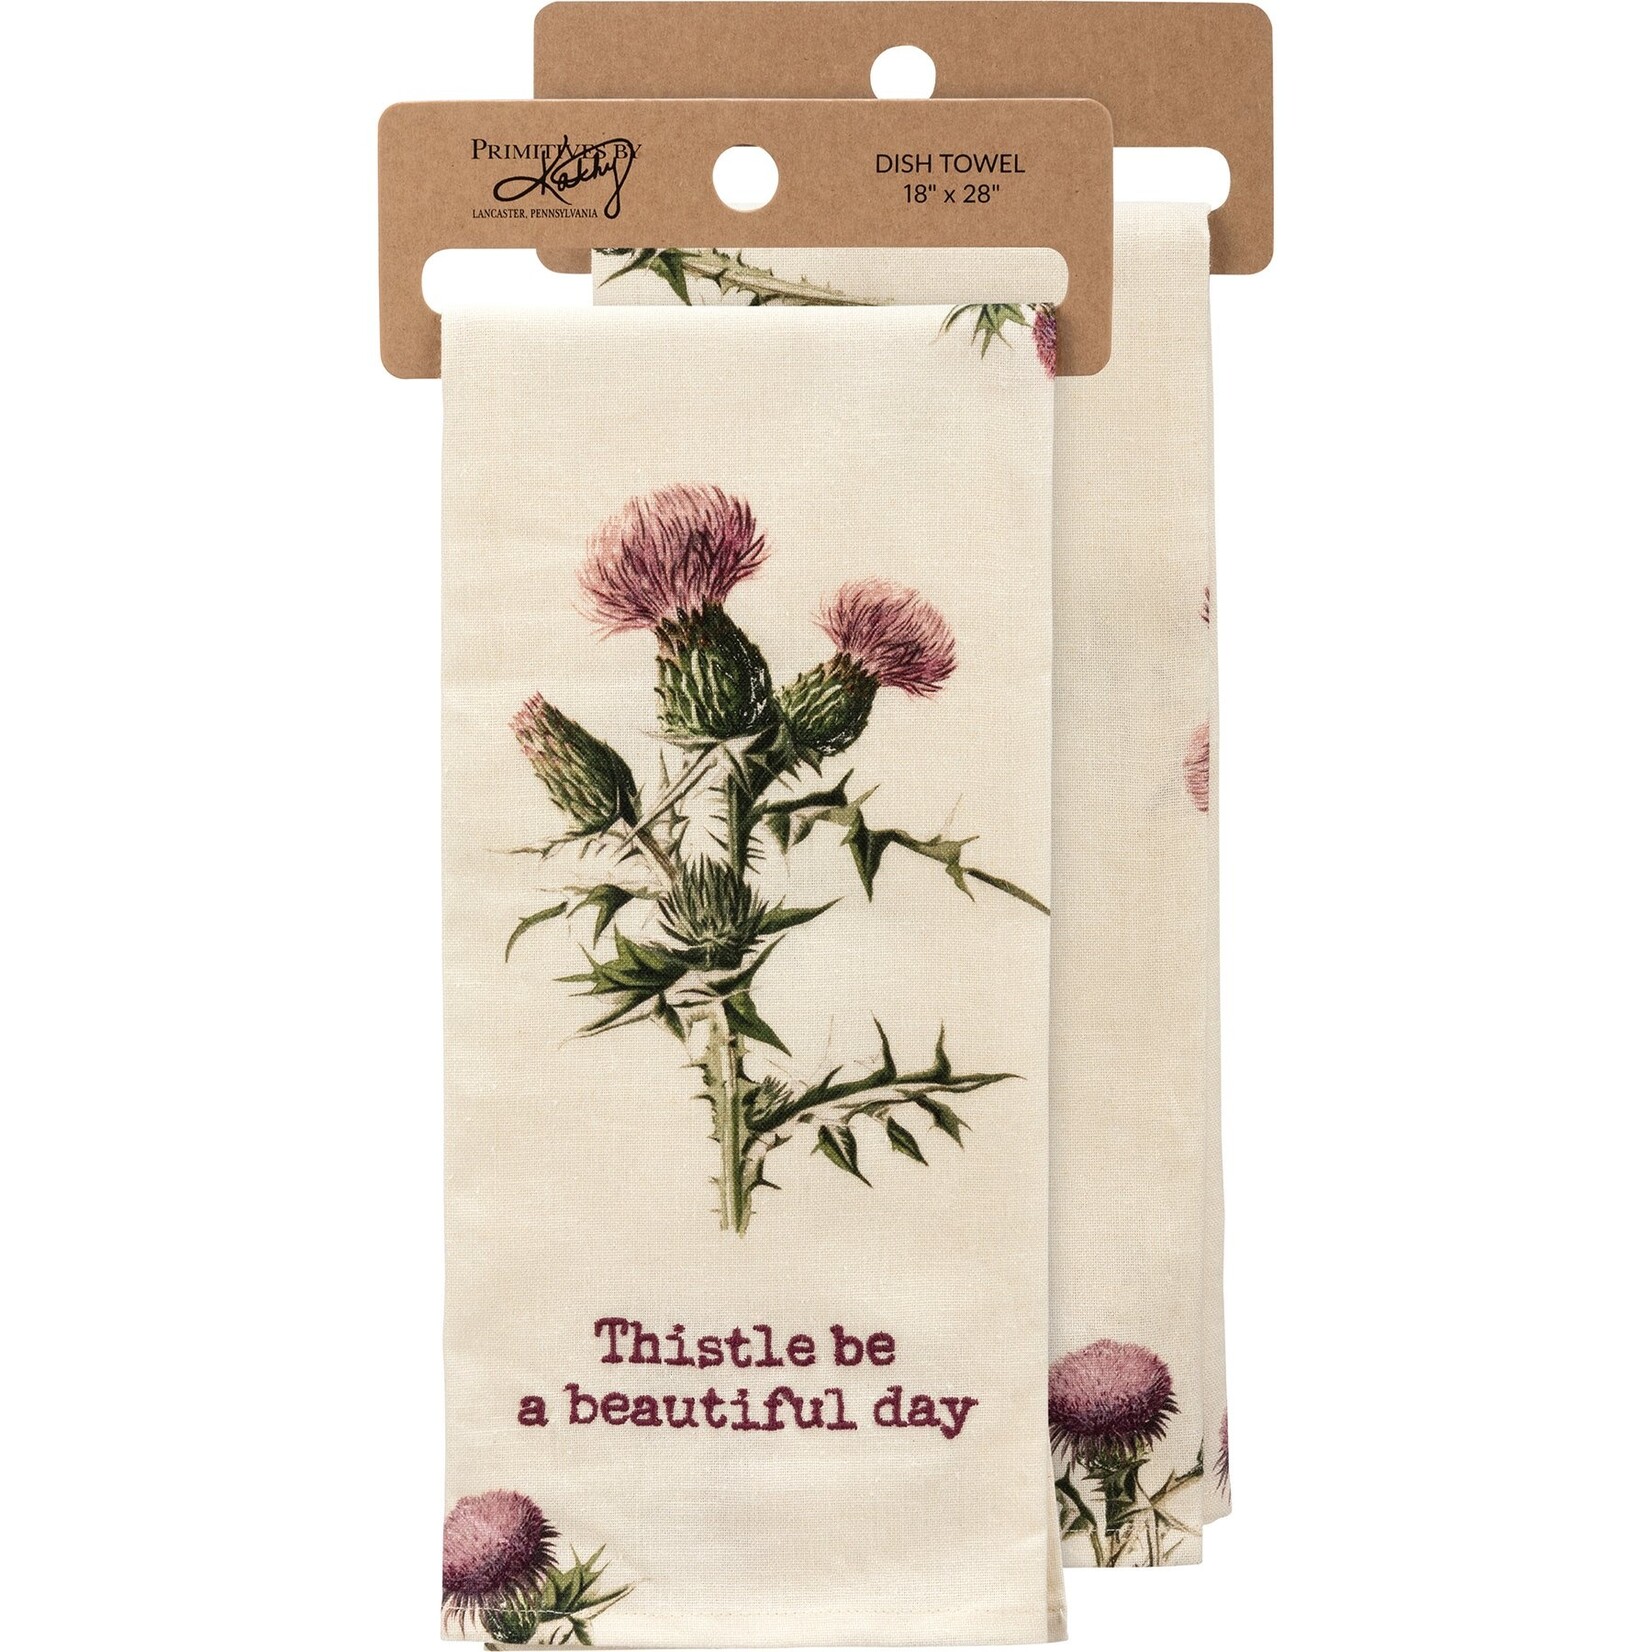 Primitives by Kathy Primitives by Kathy Thistle Be A Beautiful Day Kitchen Towel